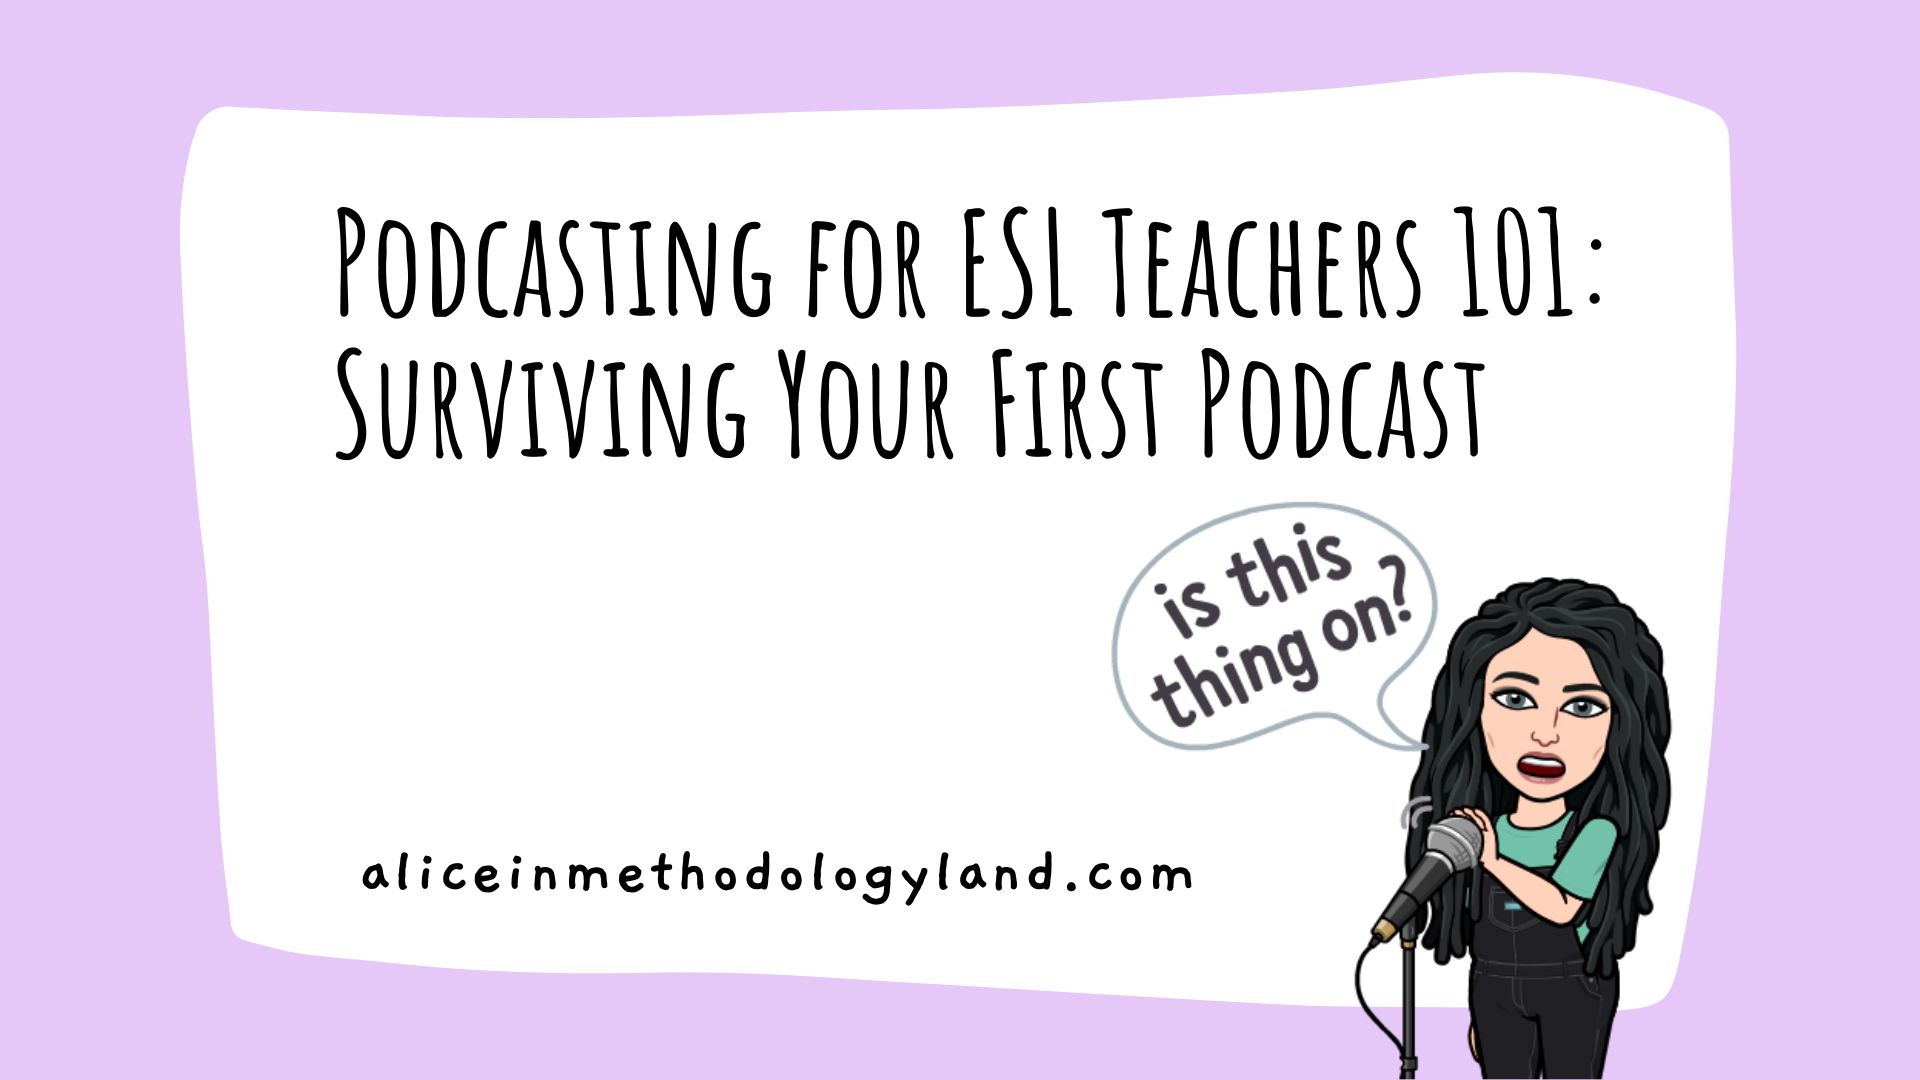 Podcasting for ESL Teachers 101: How to Survive Your First Podcast